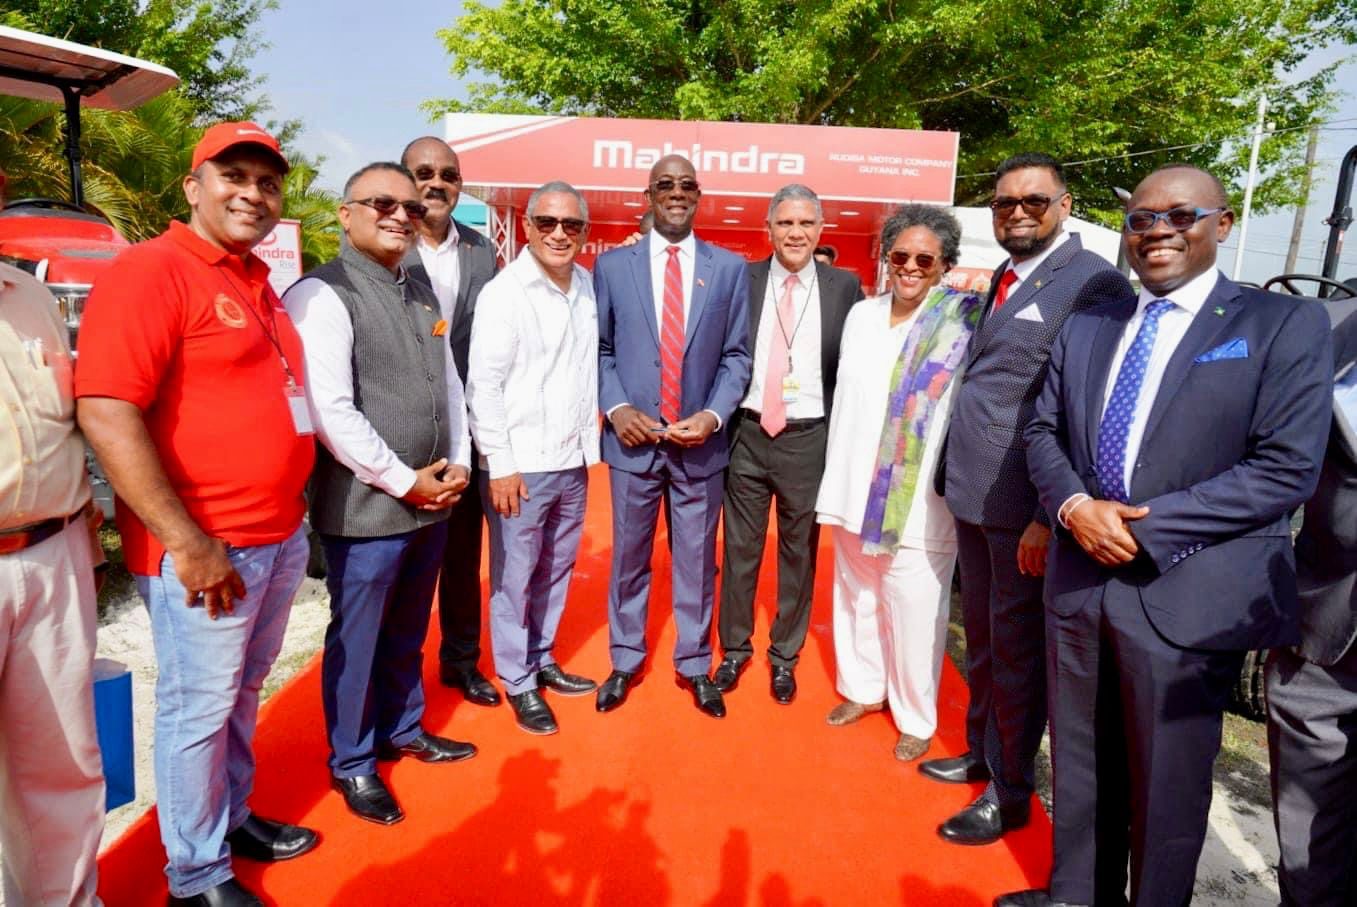 High commissioner of India to Guyana, Dr KJ Srinivasa with President Irfaan Ali and other CARICOM Head of States in front of Mahindra & Mahindra (Makers of Mahindra Tractors) at the Agri-Investment Forum and Expo